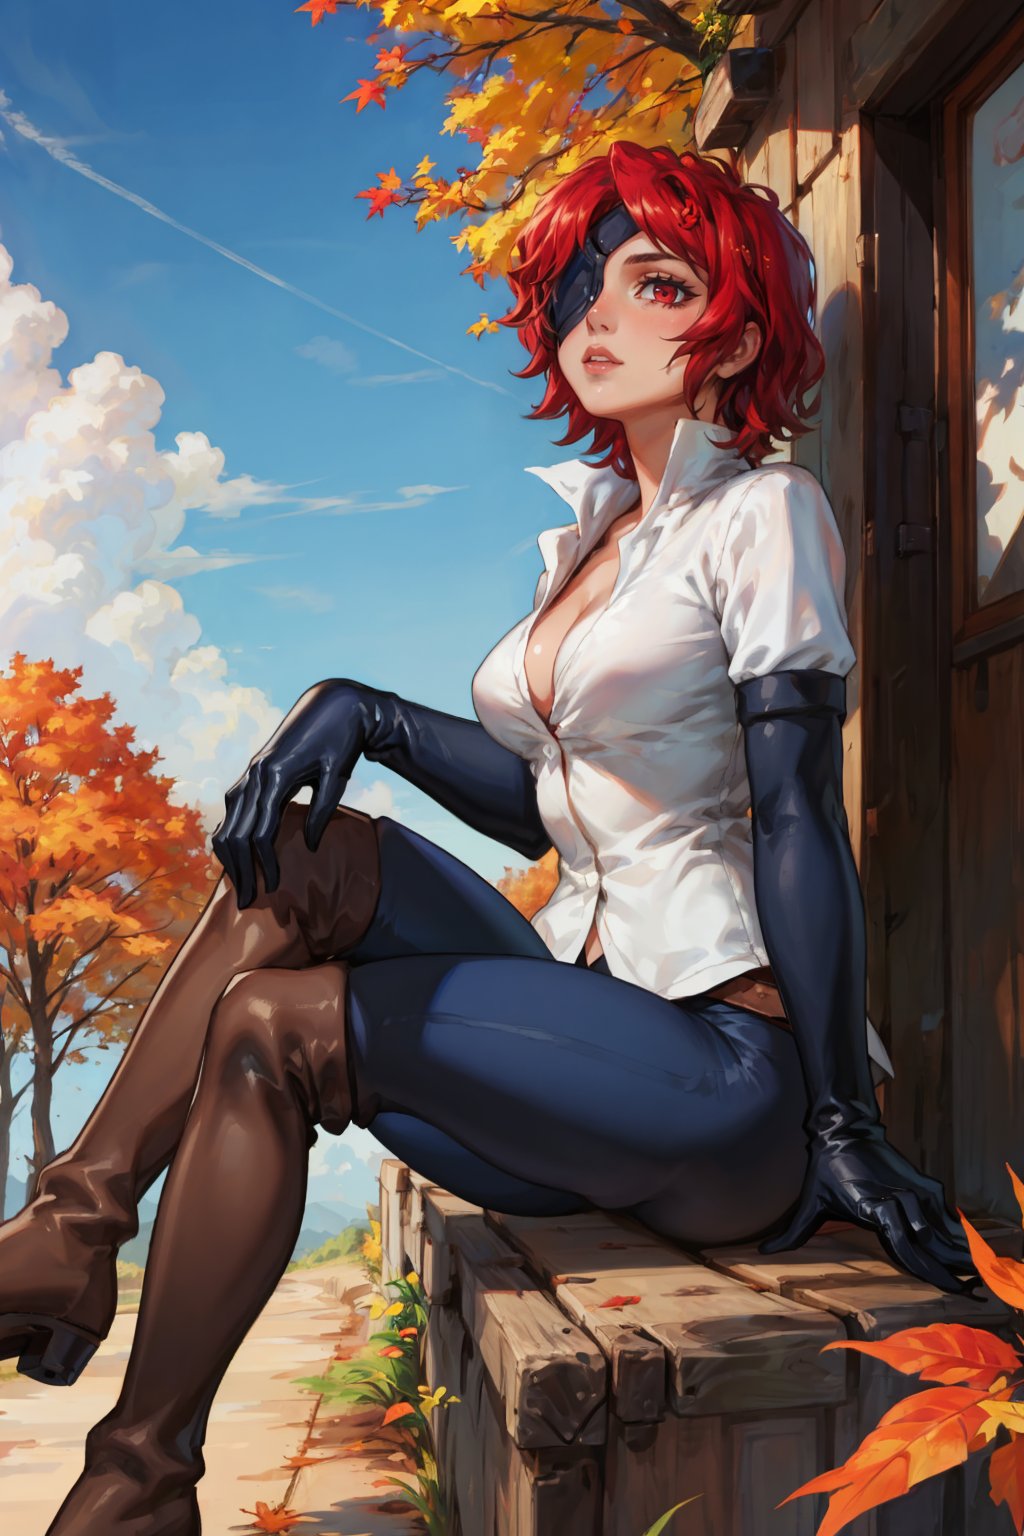 masterpiece, best quality, <lora:hephaistos-nvwls-v1-000010:0.9> hephaistos, eyepatch, white shirt, cleavage, black gloves, elbow gloves, black pants, thigh boots, sitting, from side, blue sky, trees, autumn, looking up